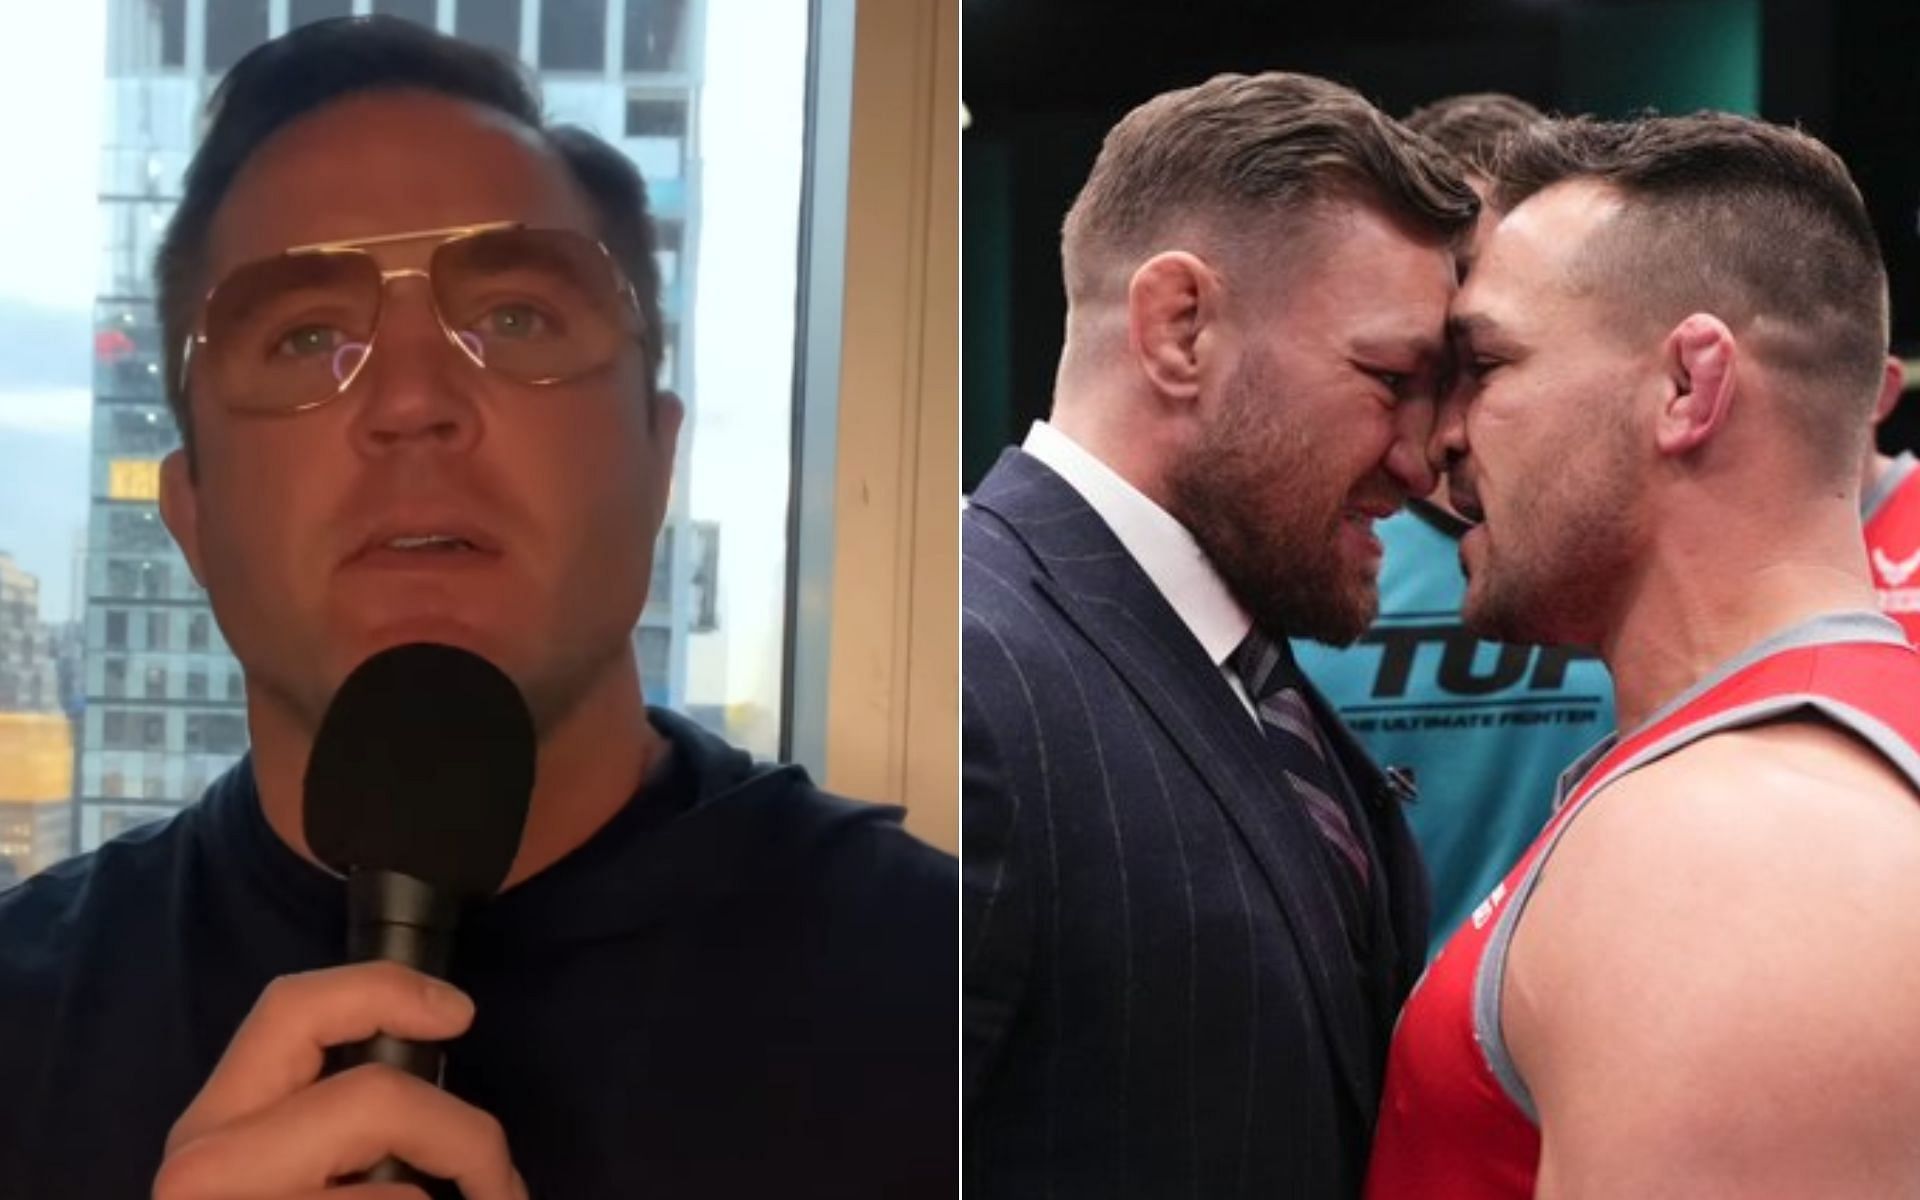 Chael Sonnen [Left], and Conor McGregor and Michael Chandler faceoff [Right] [Photo credit: Chael Sonnen - YouTube, and @UltimateFighter - X]